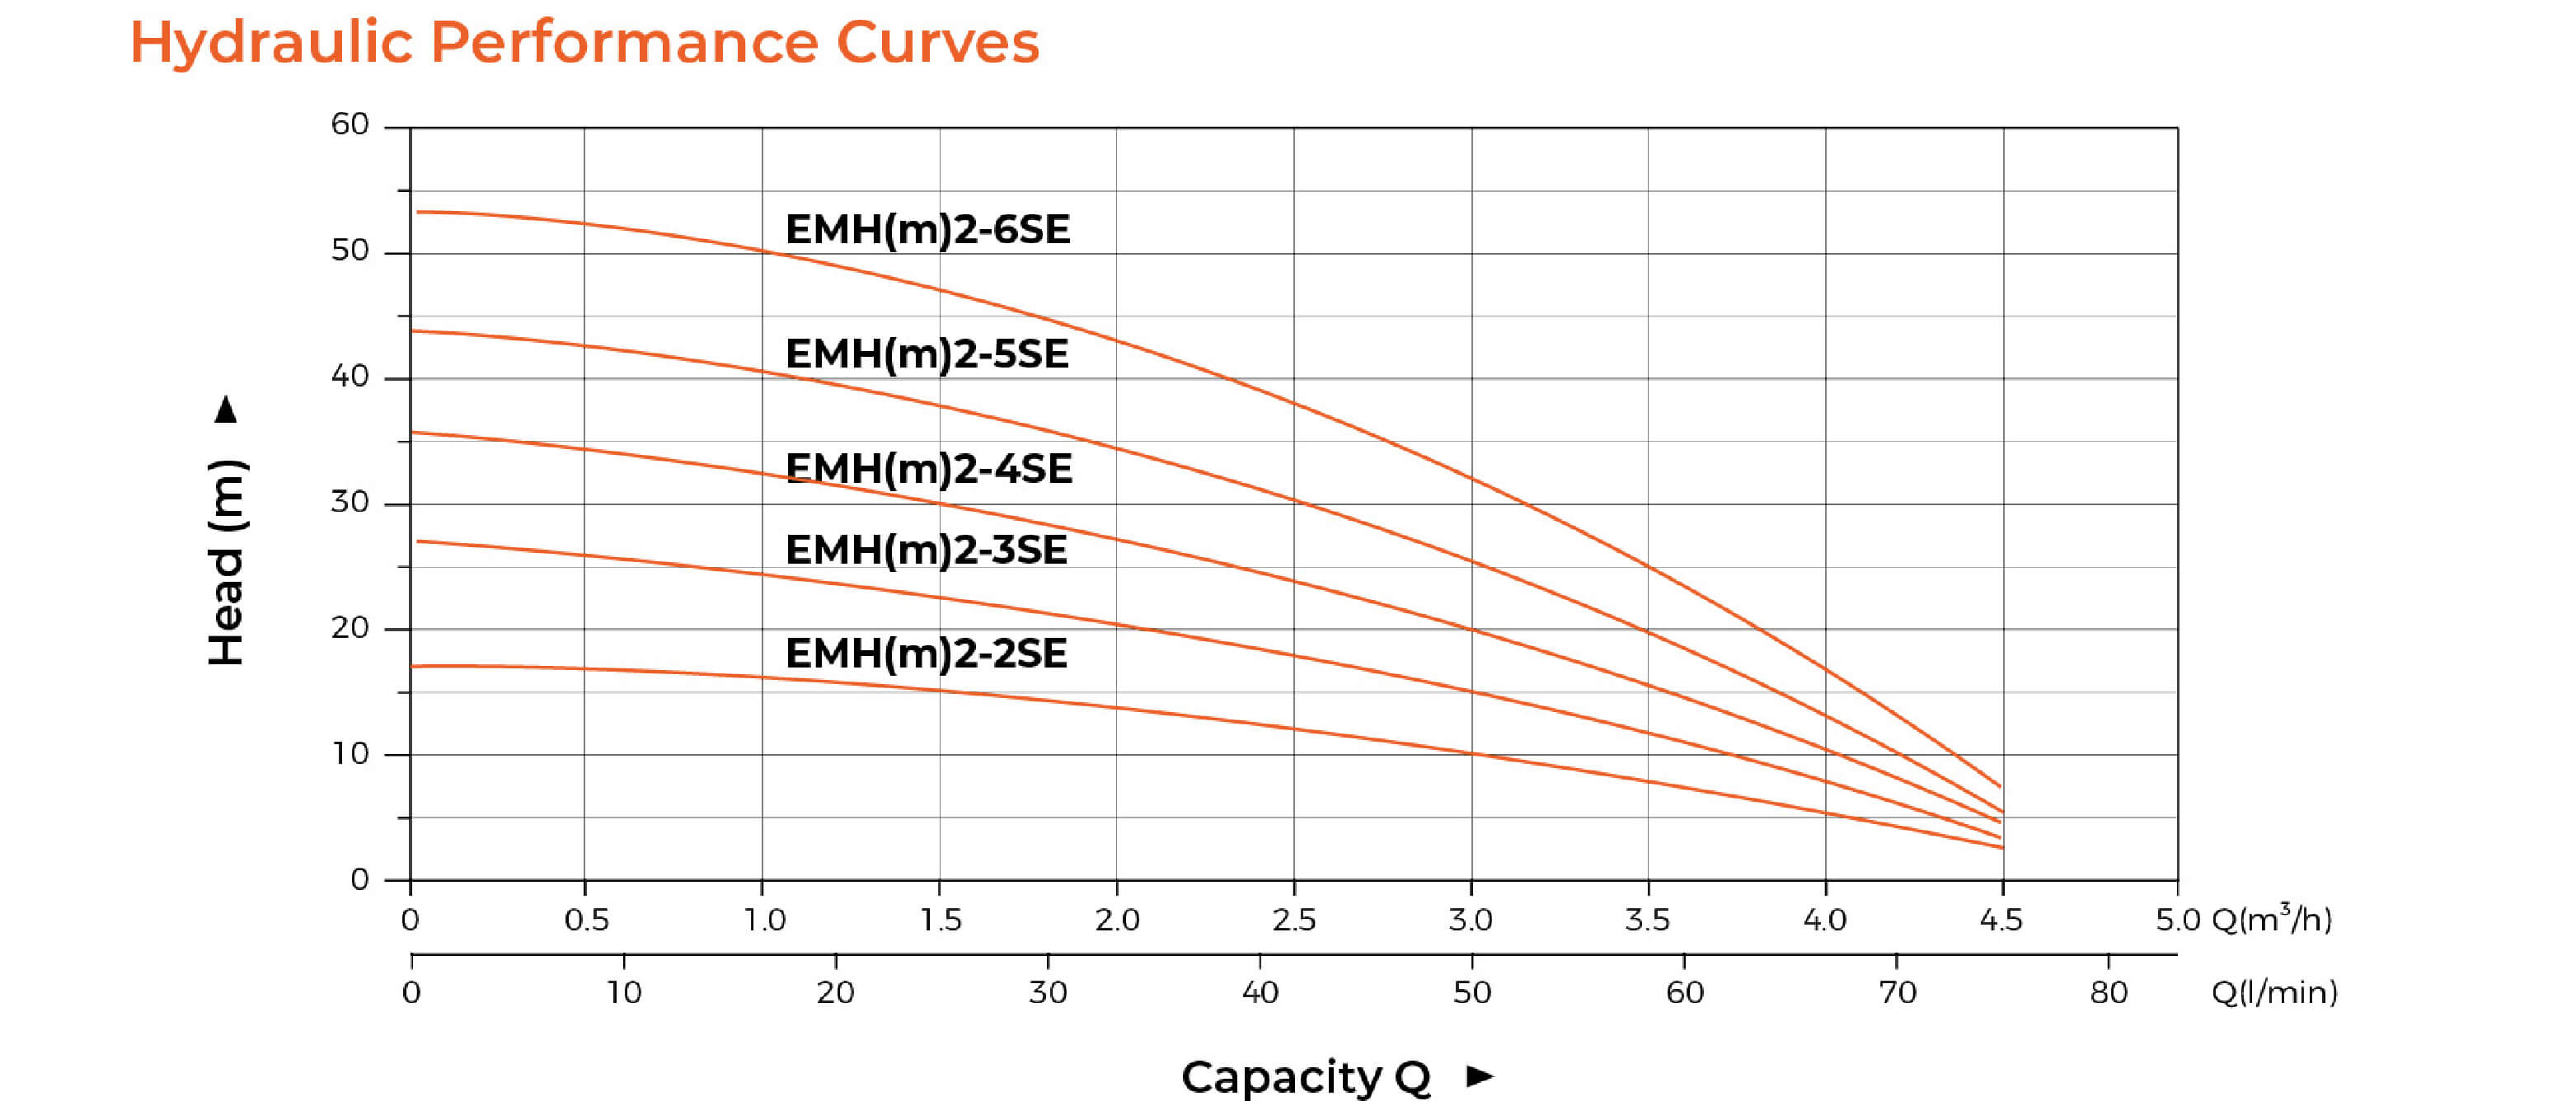 EMHm2-SE Stainless Steel Horizontal Multistage Pump Hydraulic Performance Curves